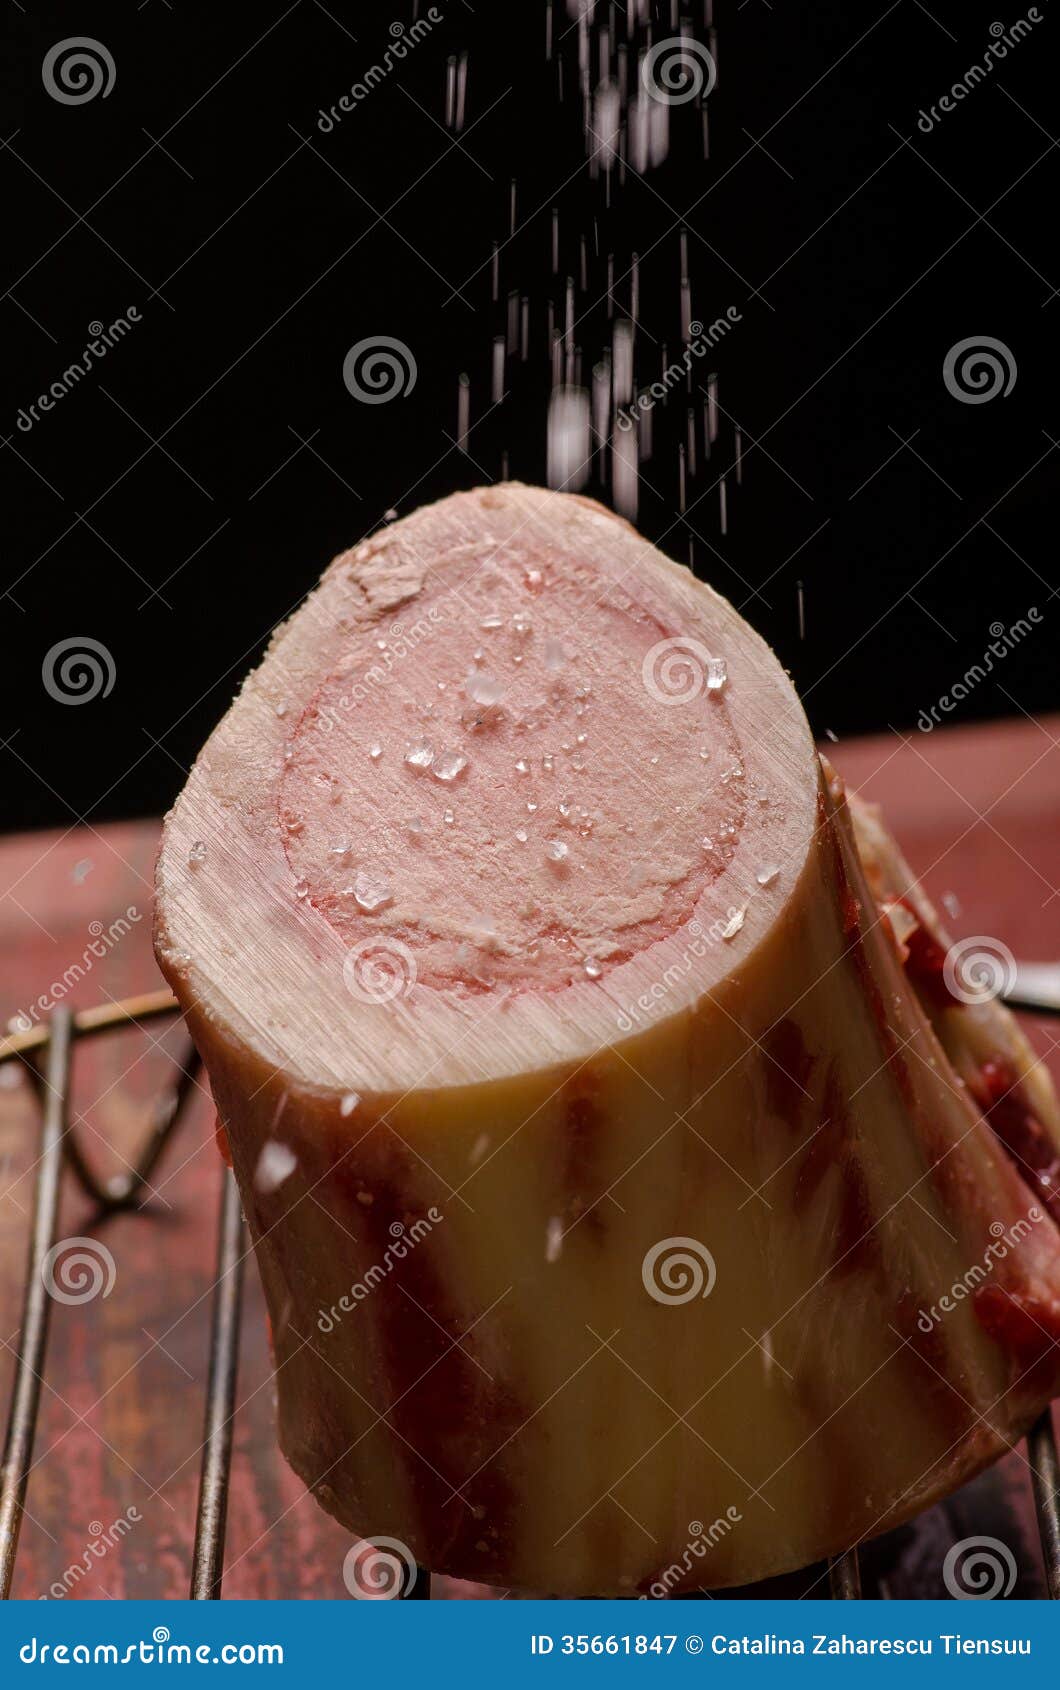 Bone with raw marrow stock image. Image of tissue, delicious - 35661847